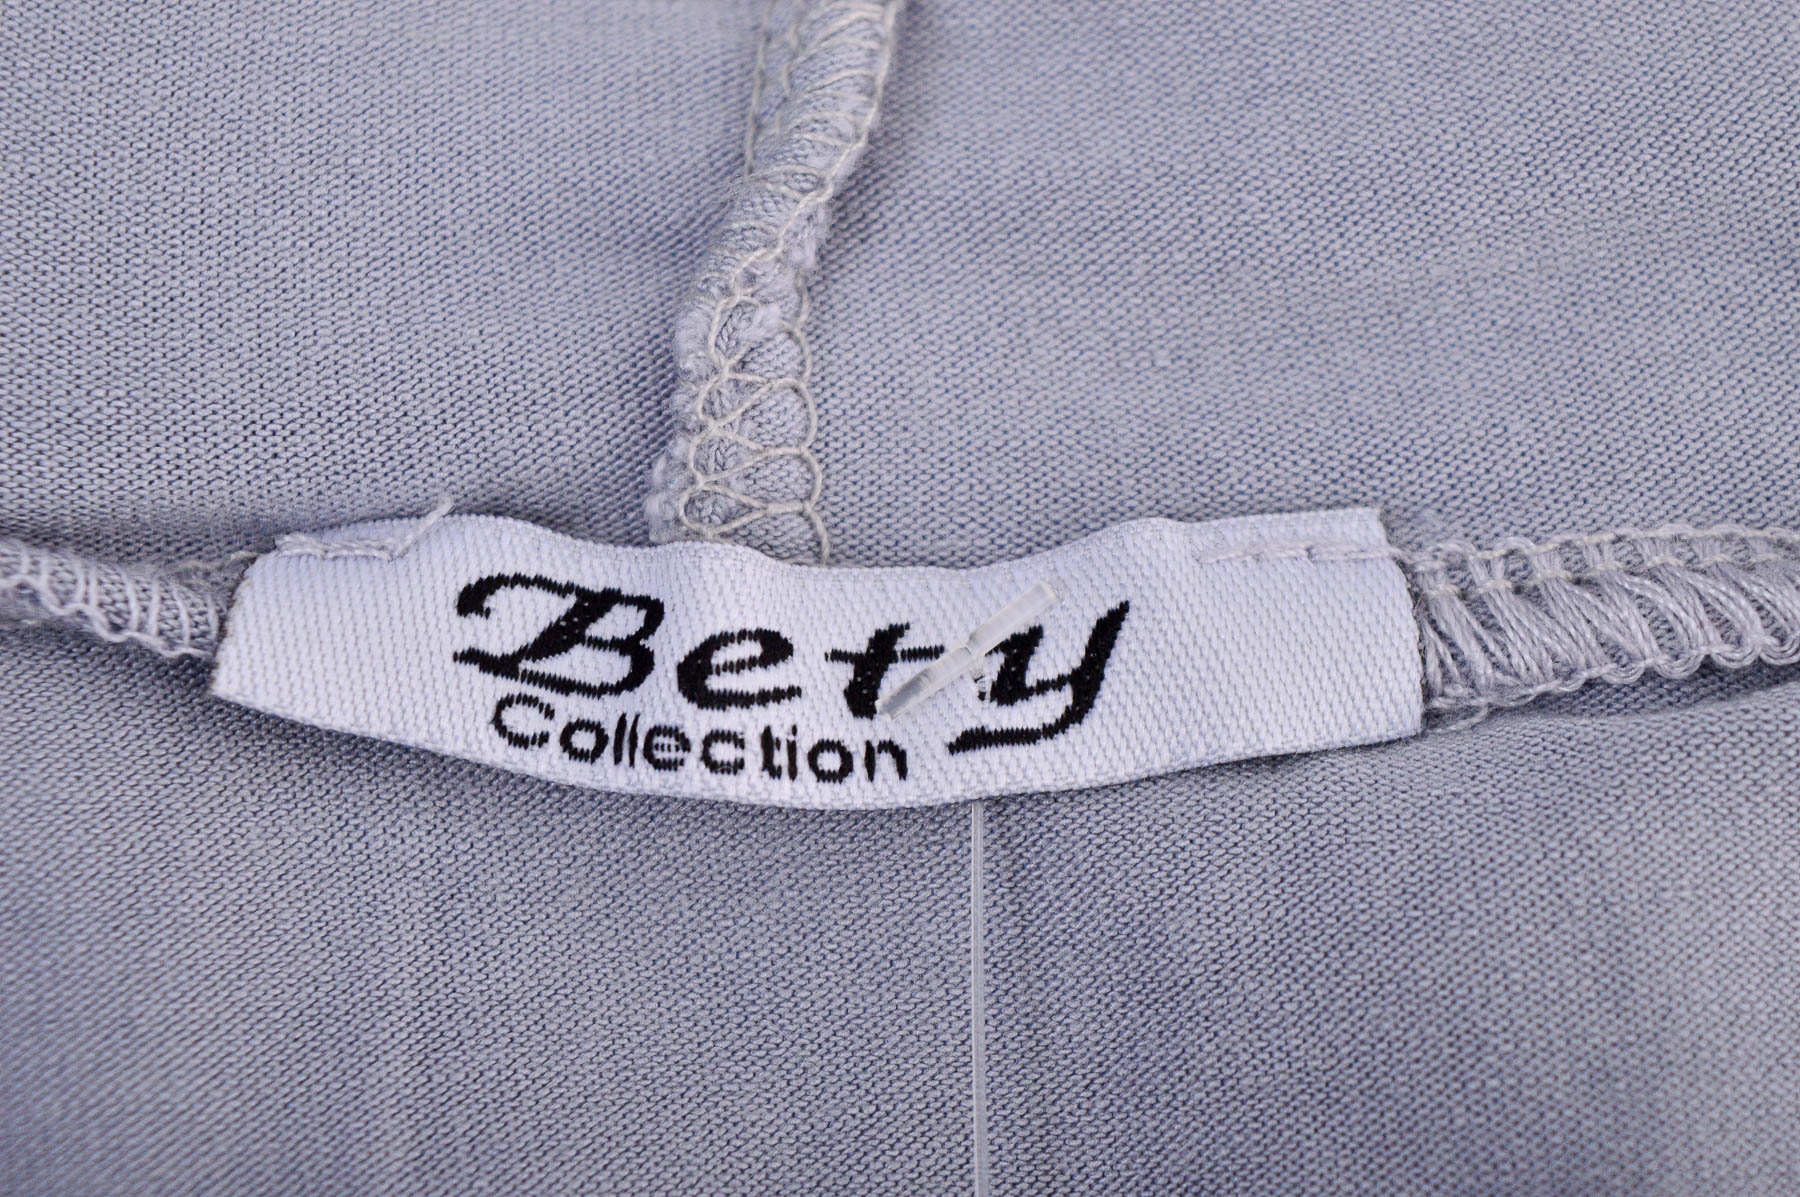 Women's blouse - Bety Collection - 2